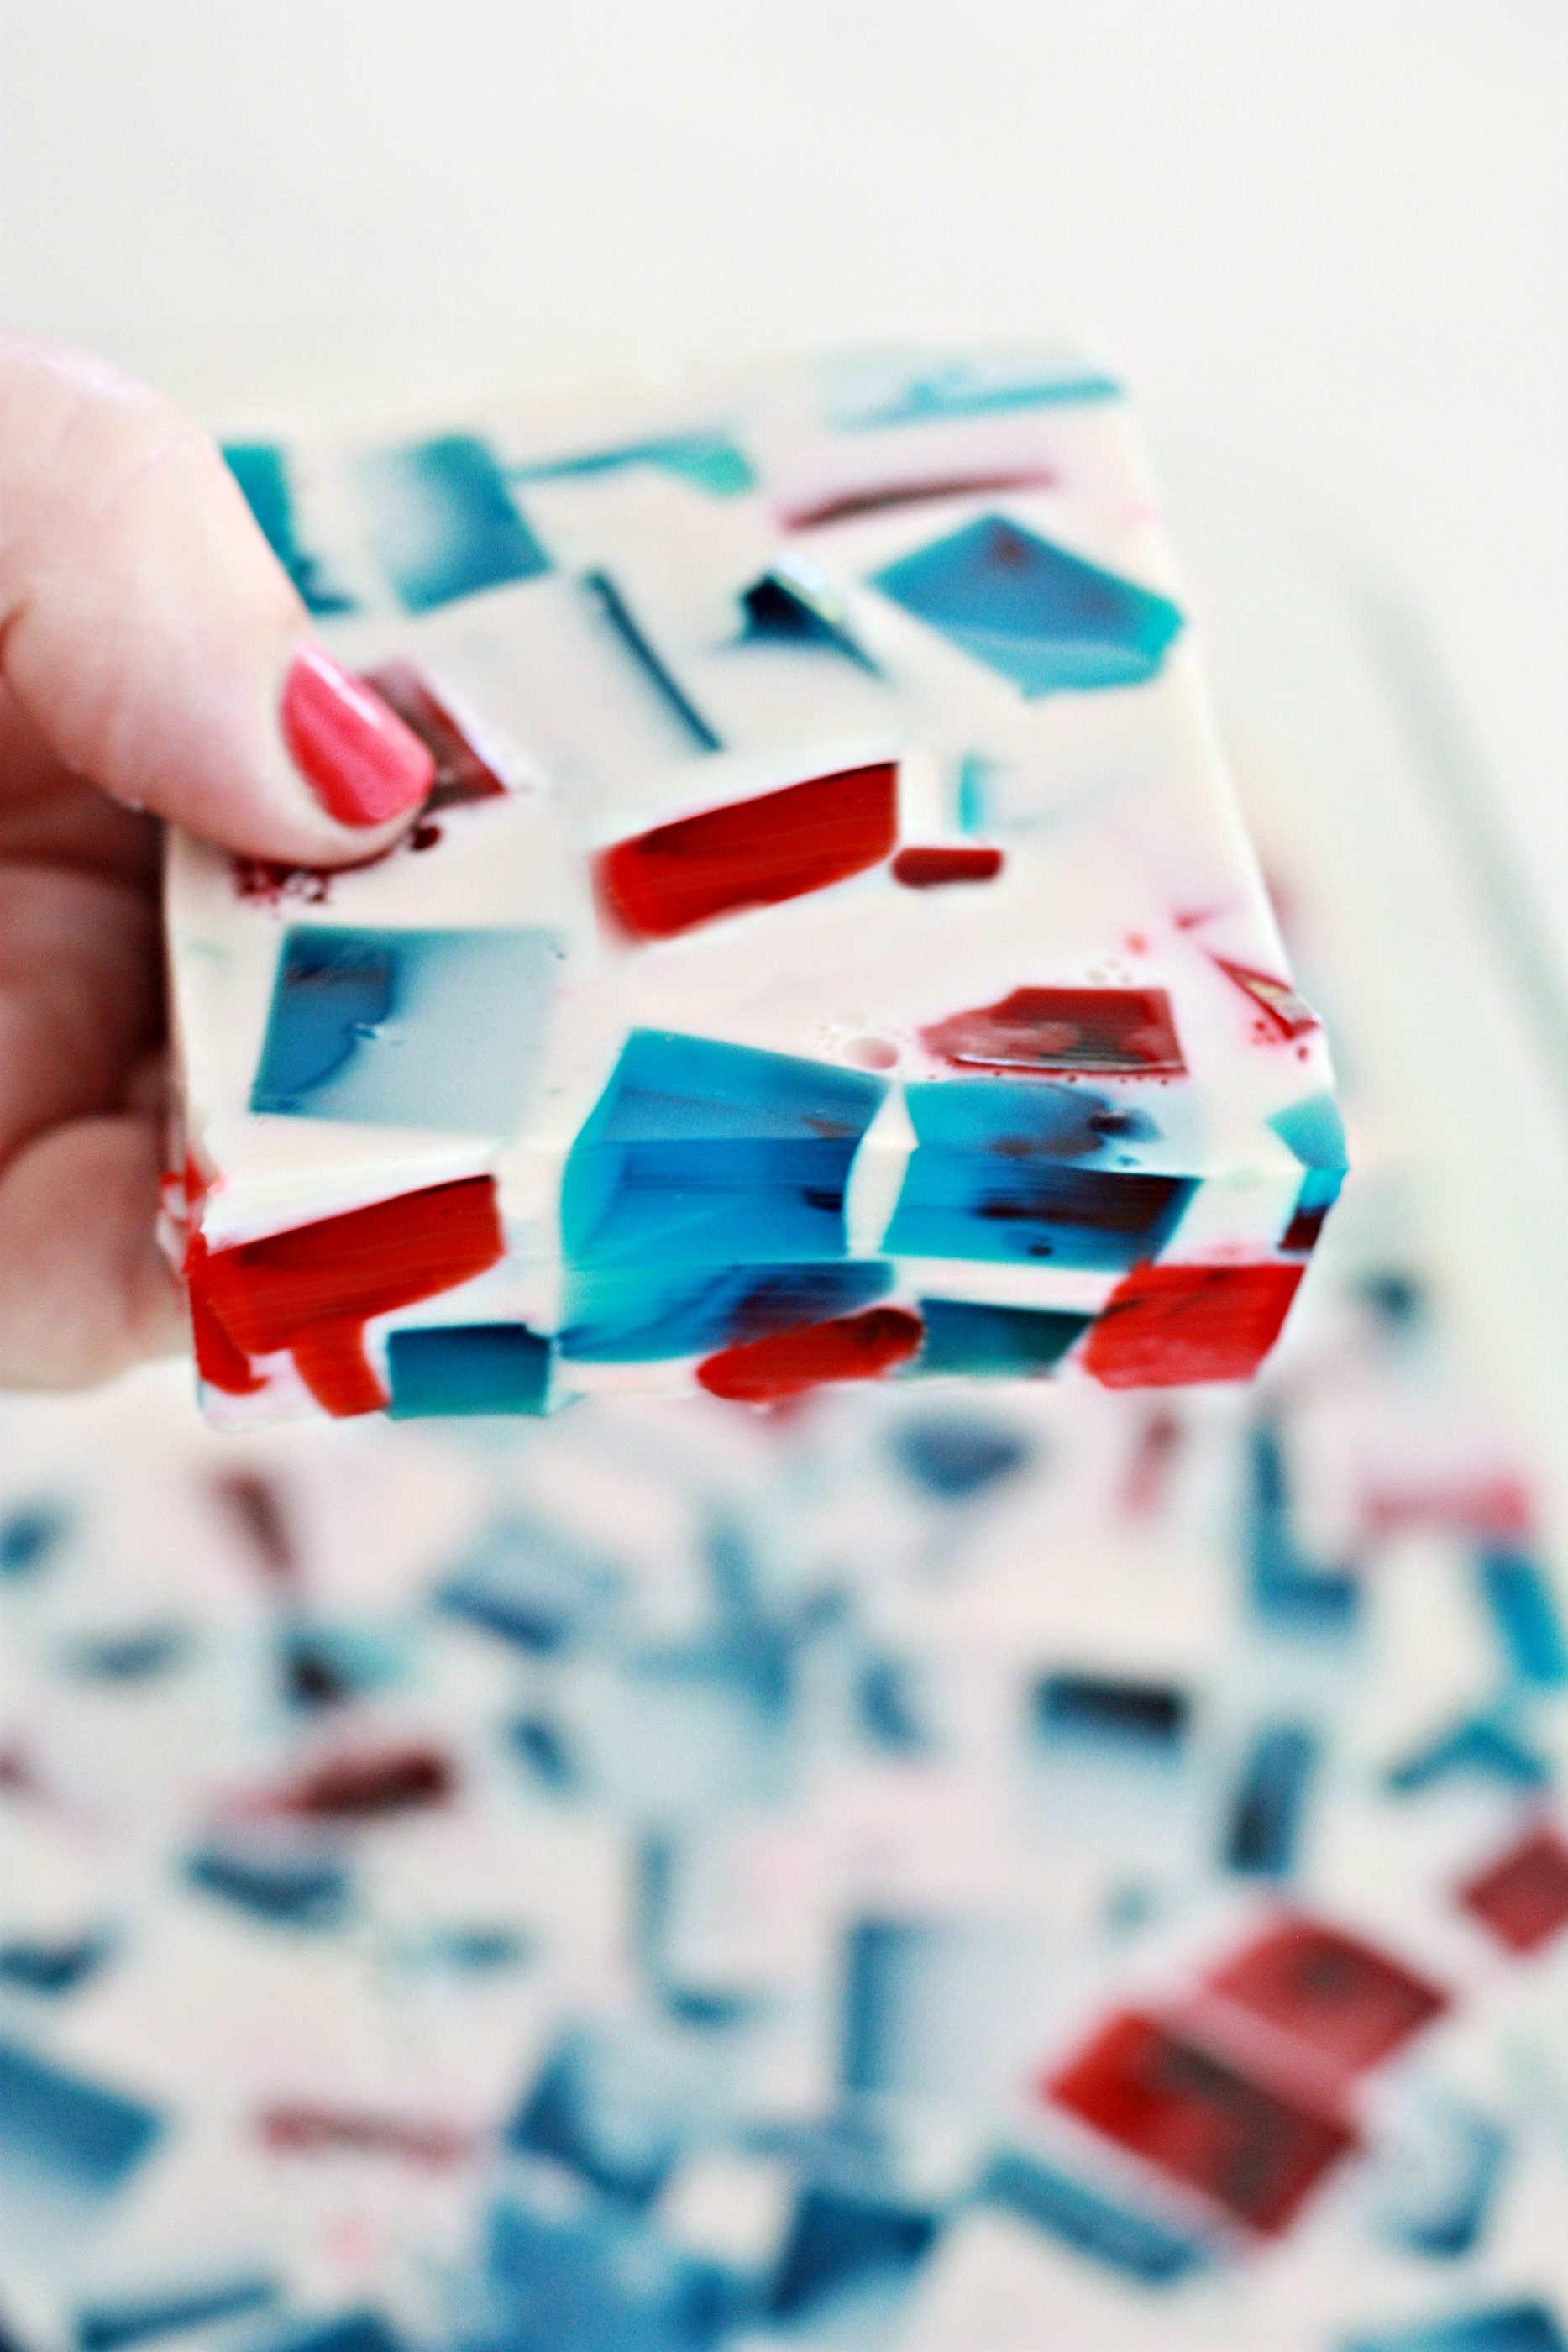 Red White and Blue Stained Glass Jell-o